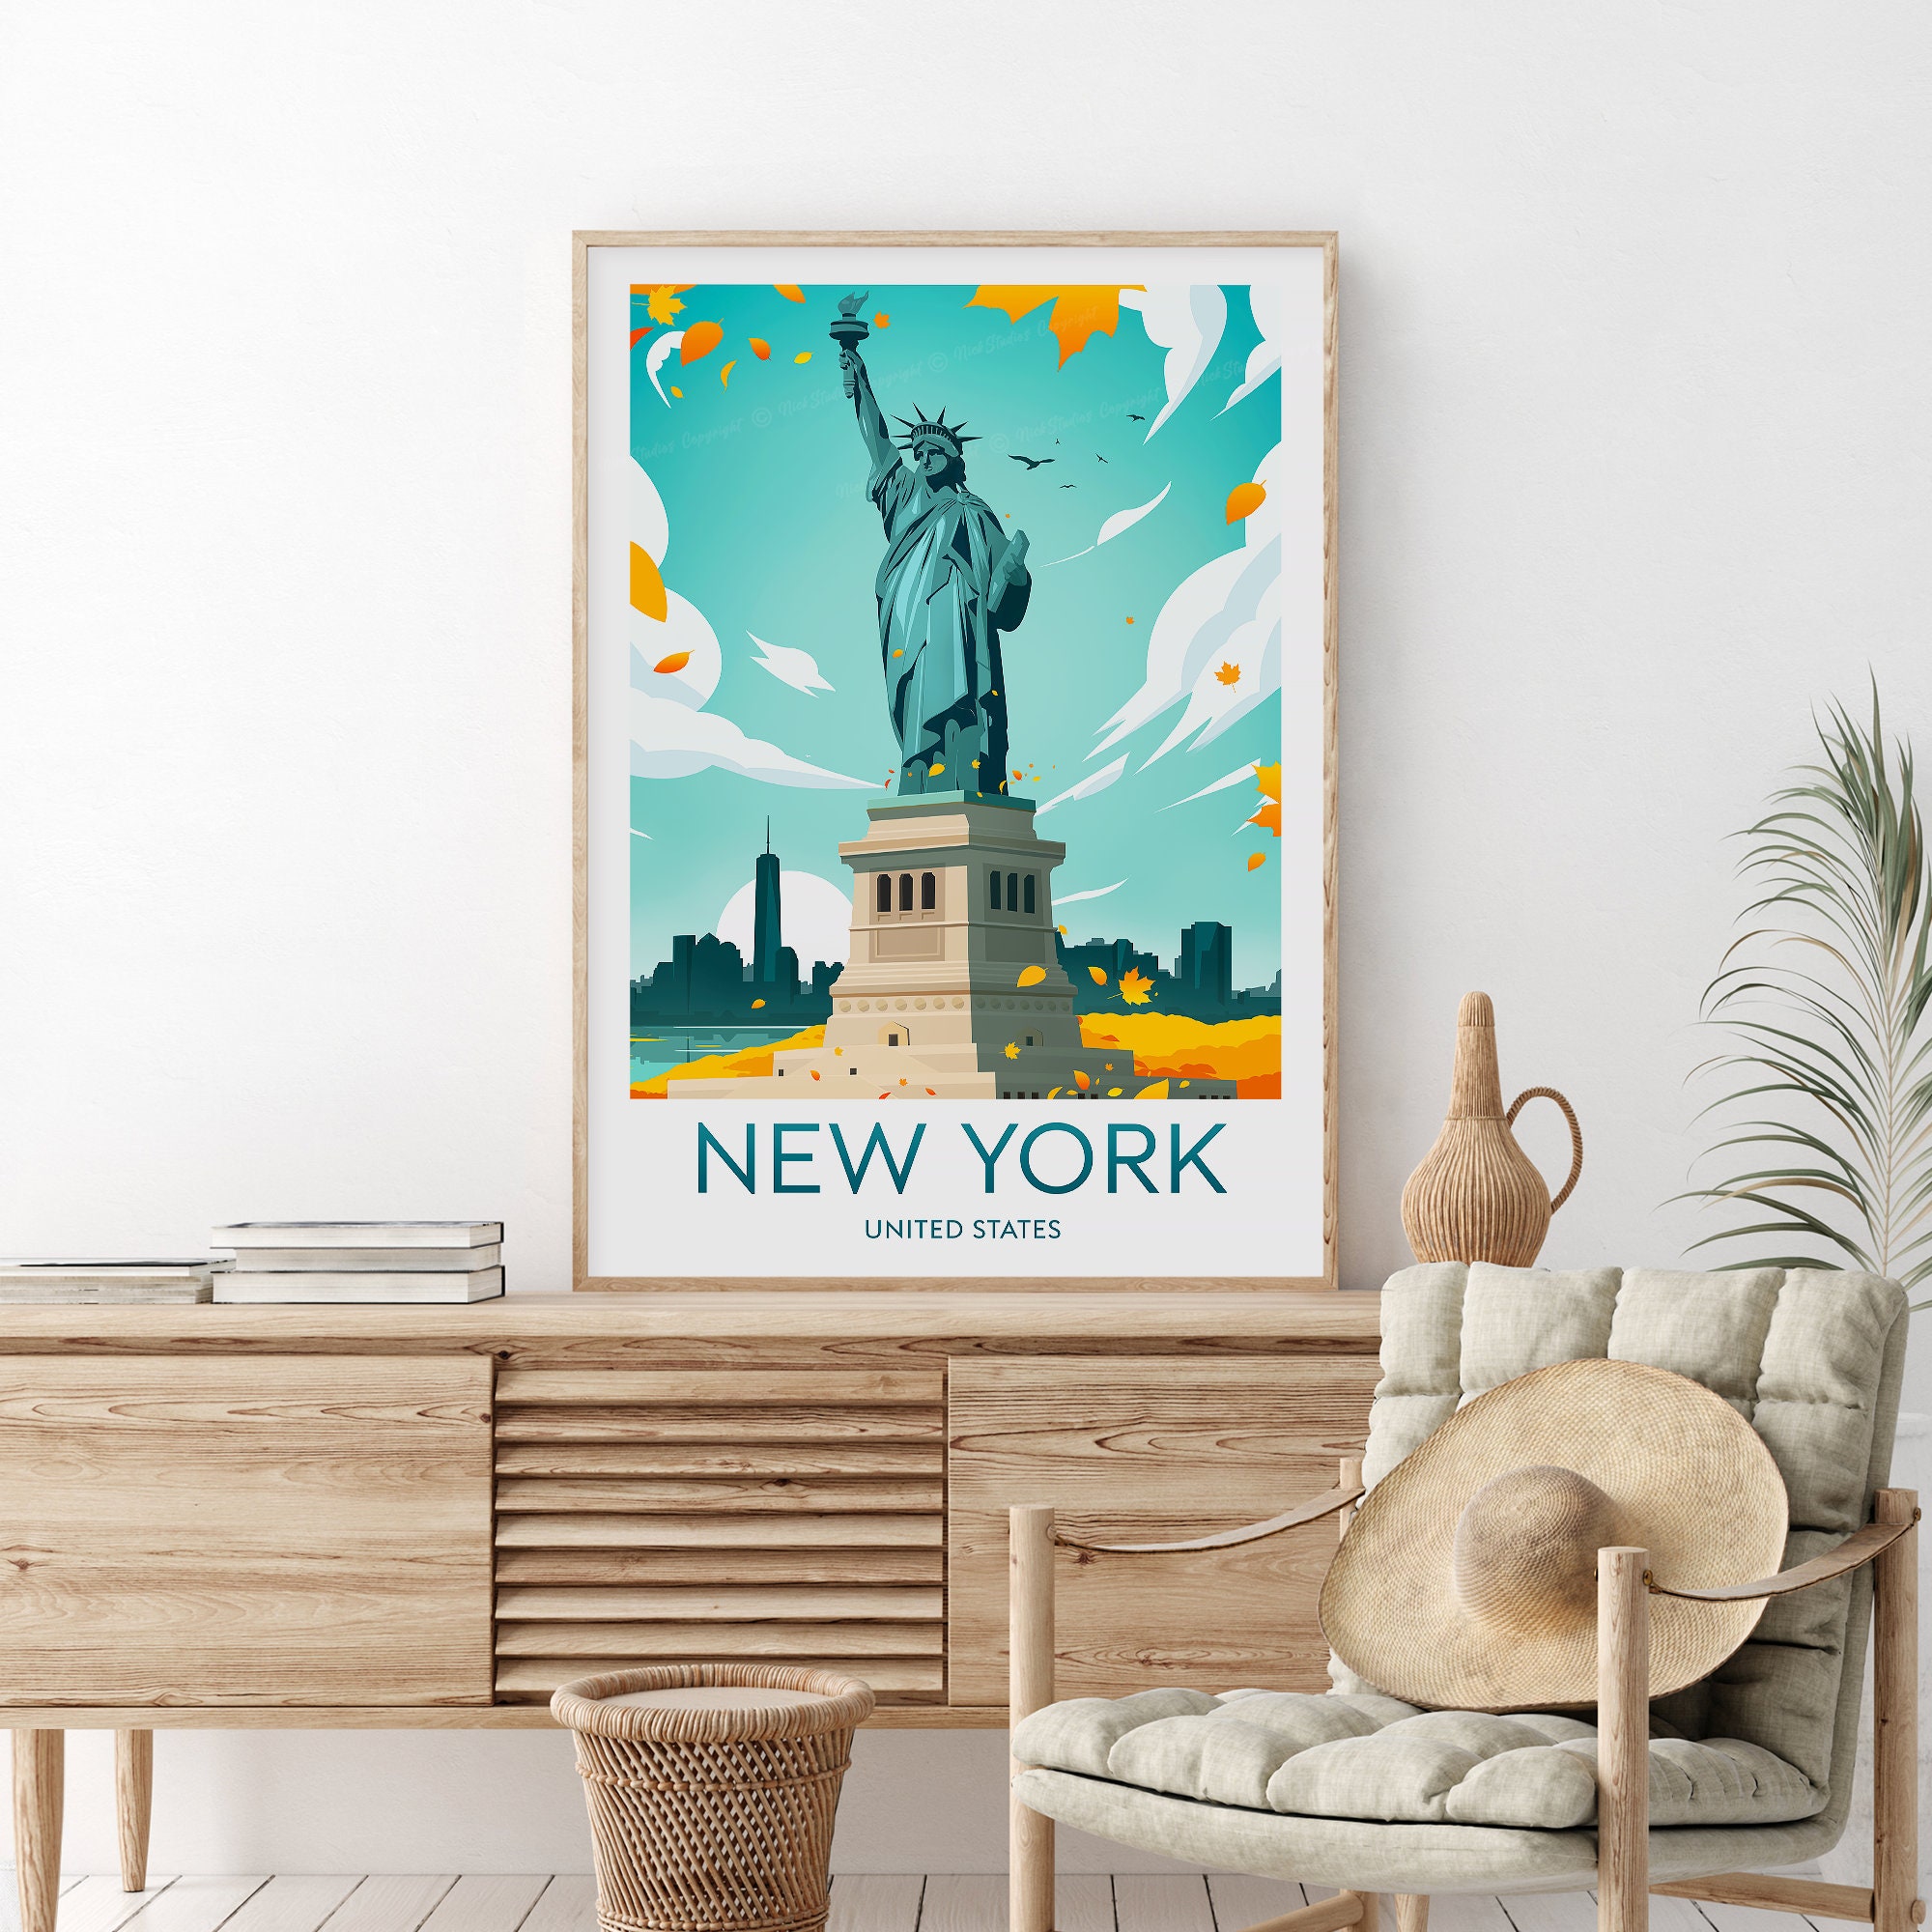 Discover New York City travel print - United States, Statue of Liberty, New York poster, Wedding gifts